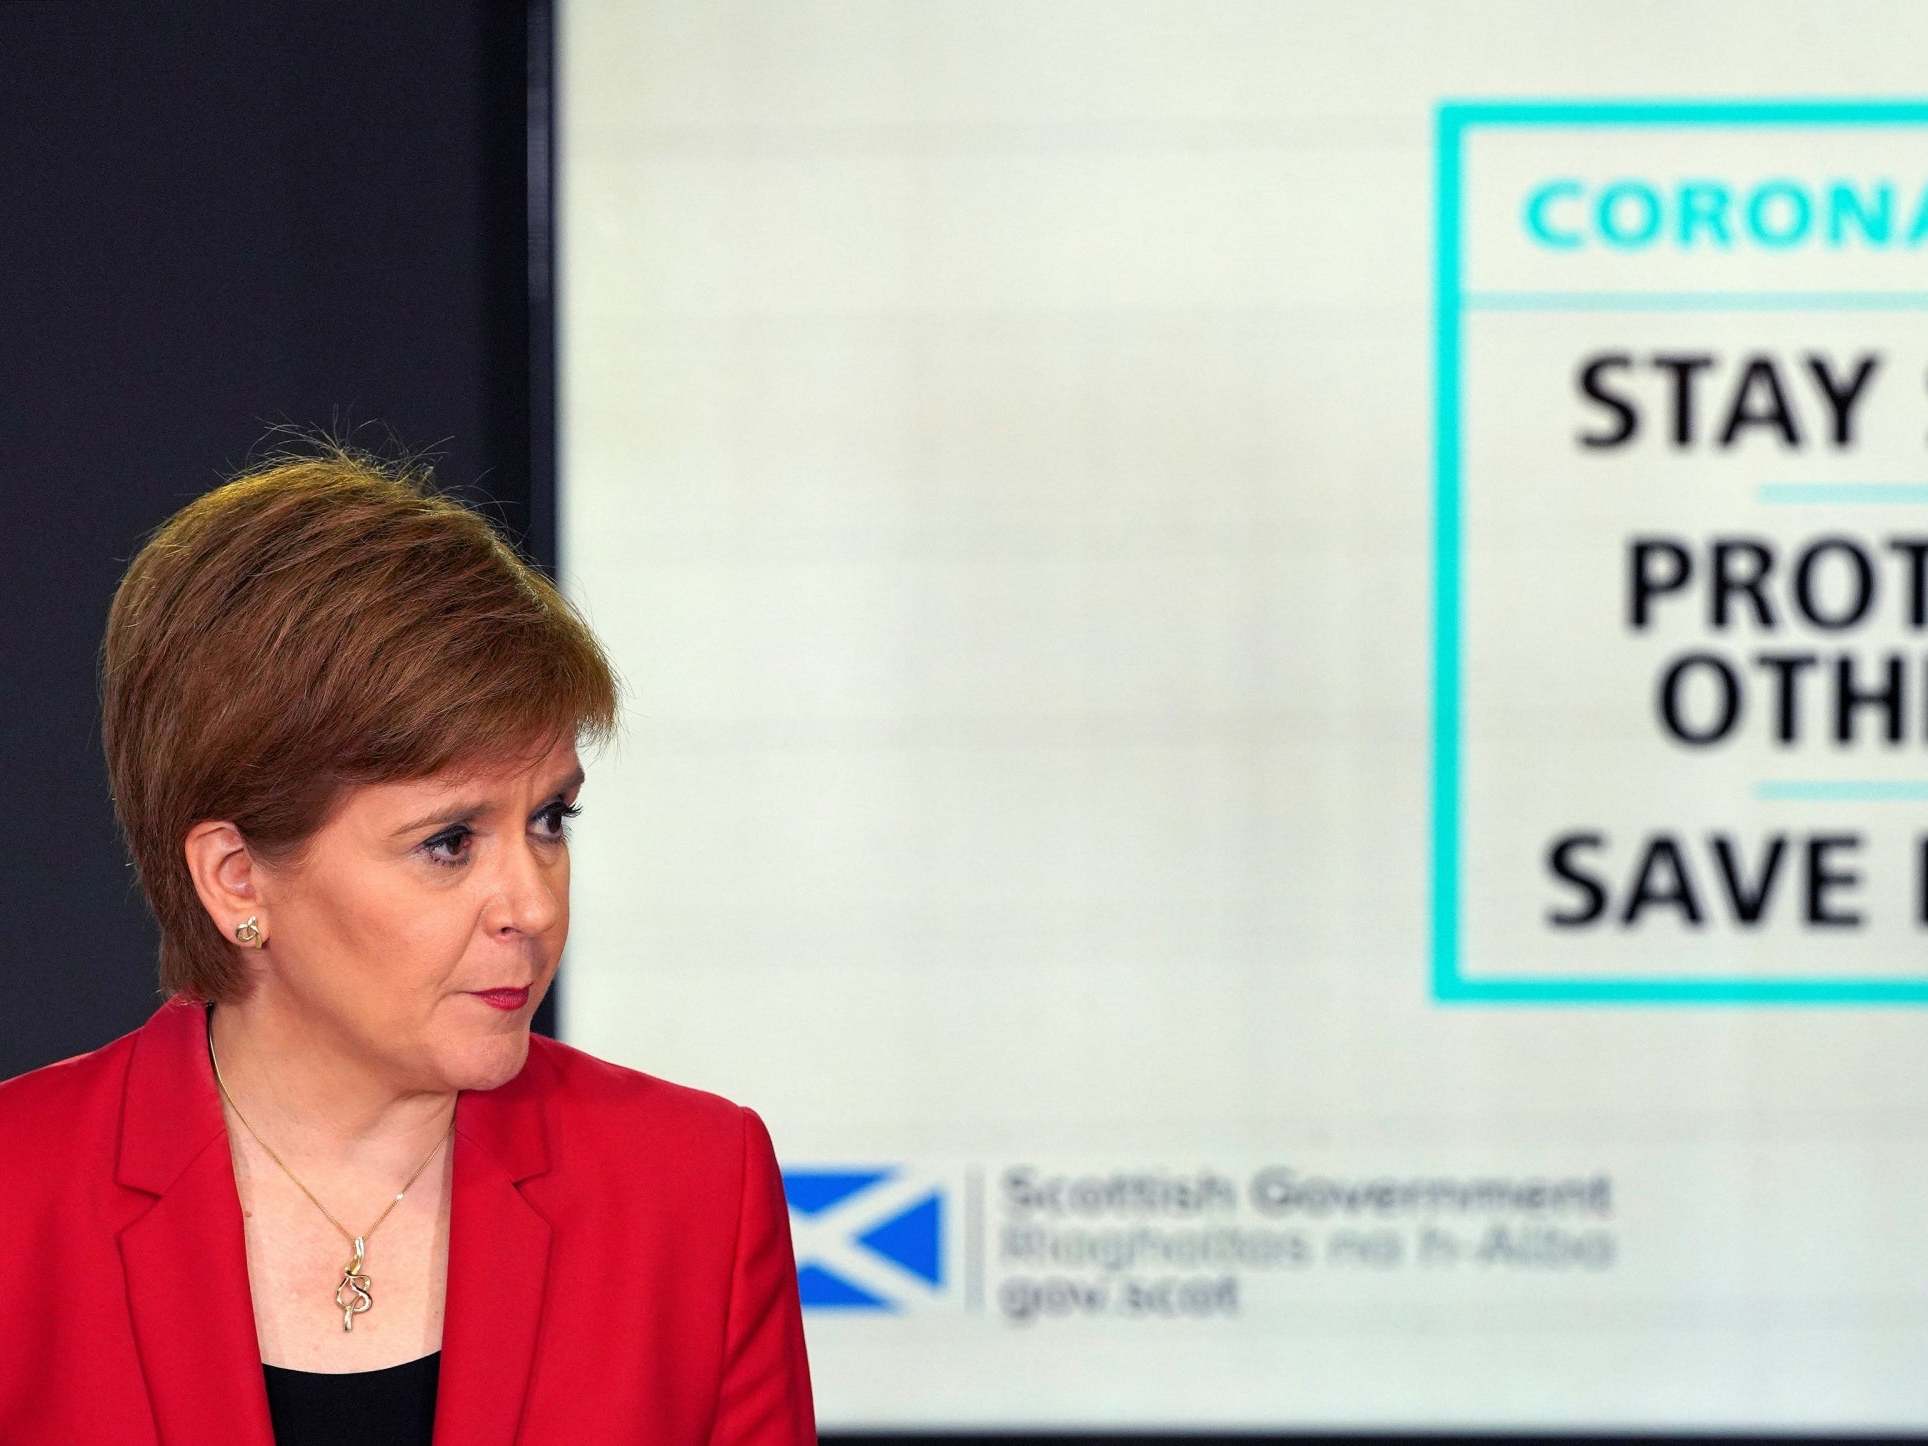 The Scottish leader says the country is in a ‘fragile’ situation